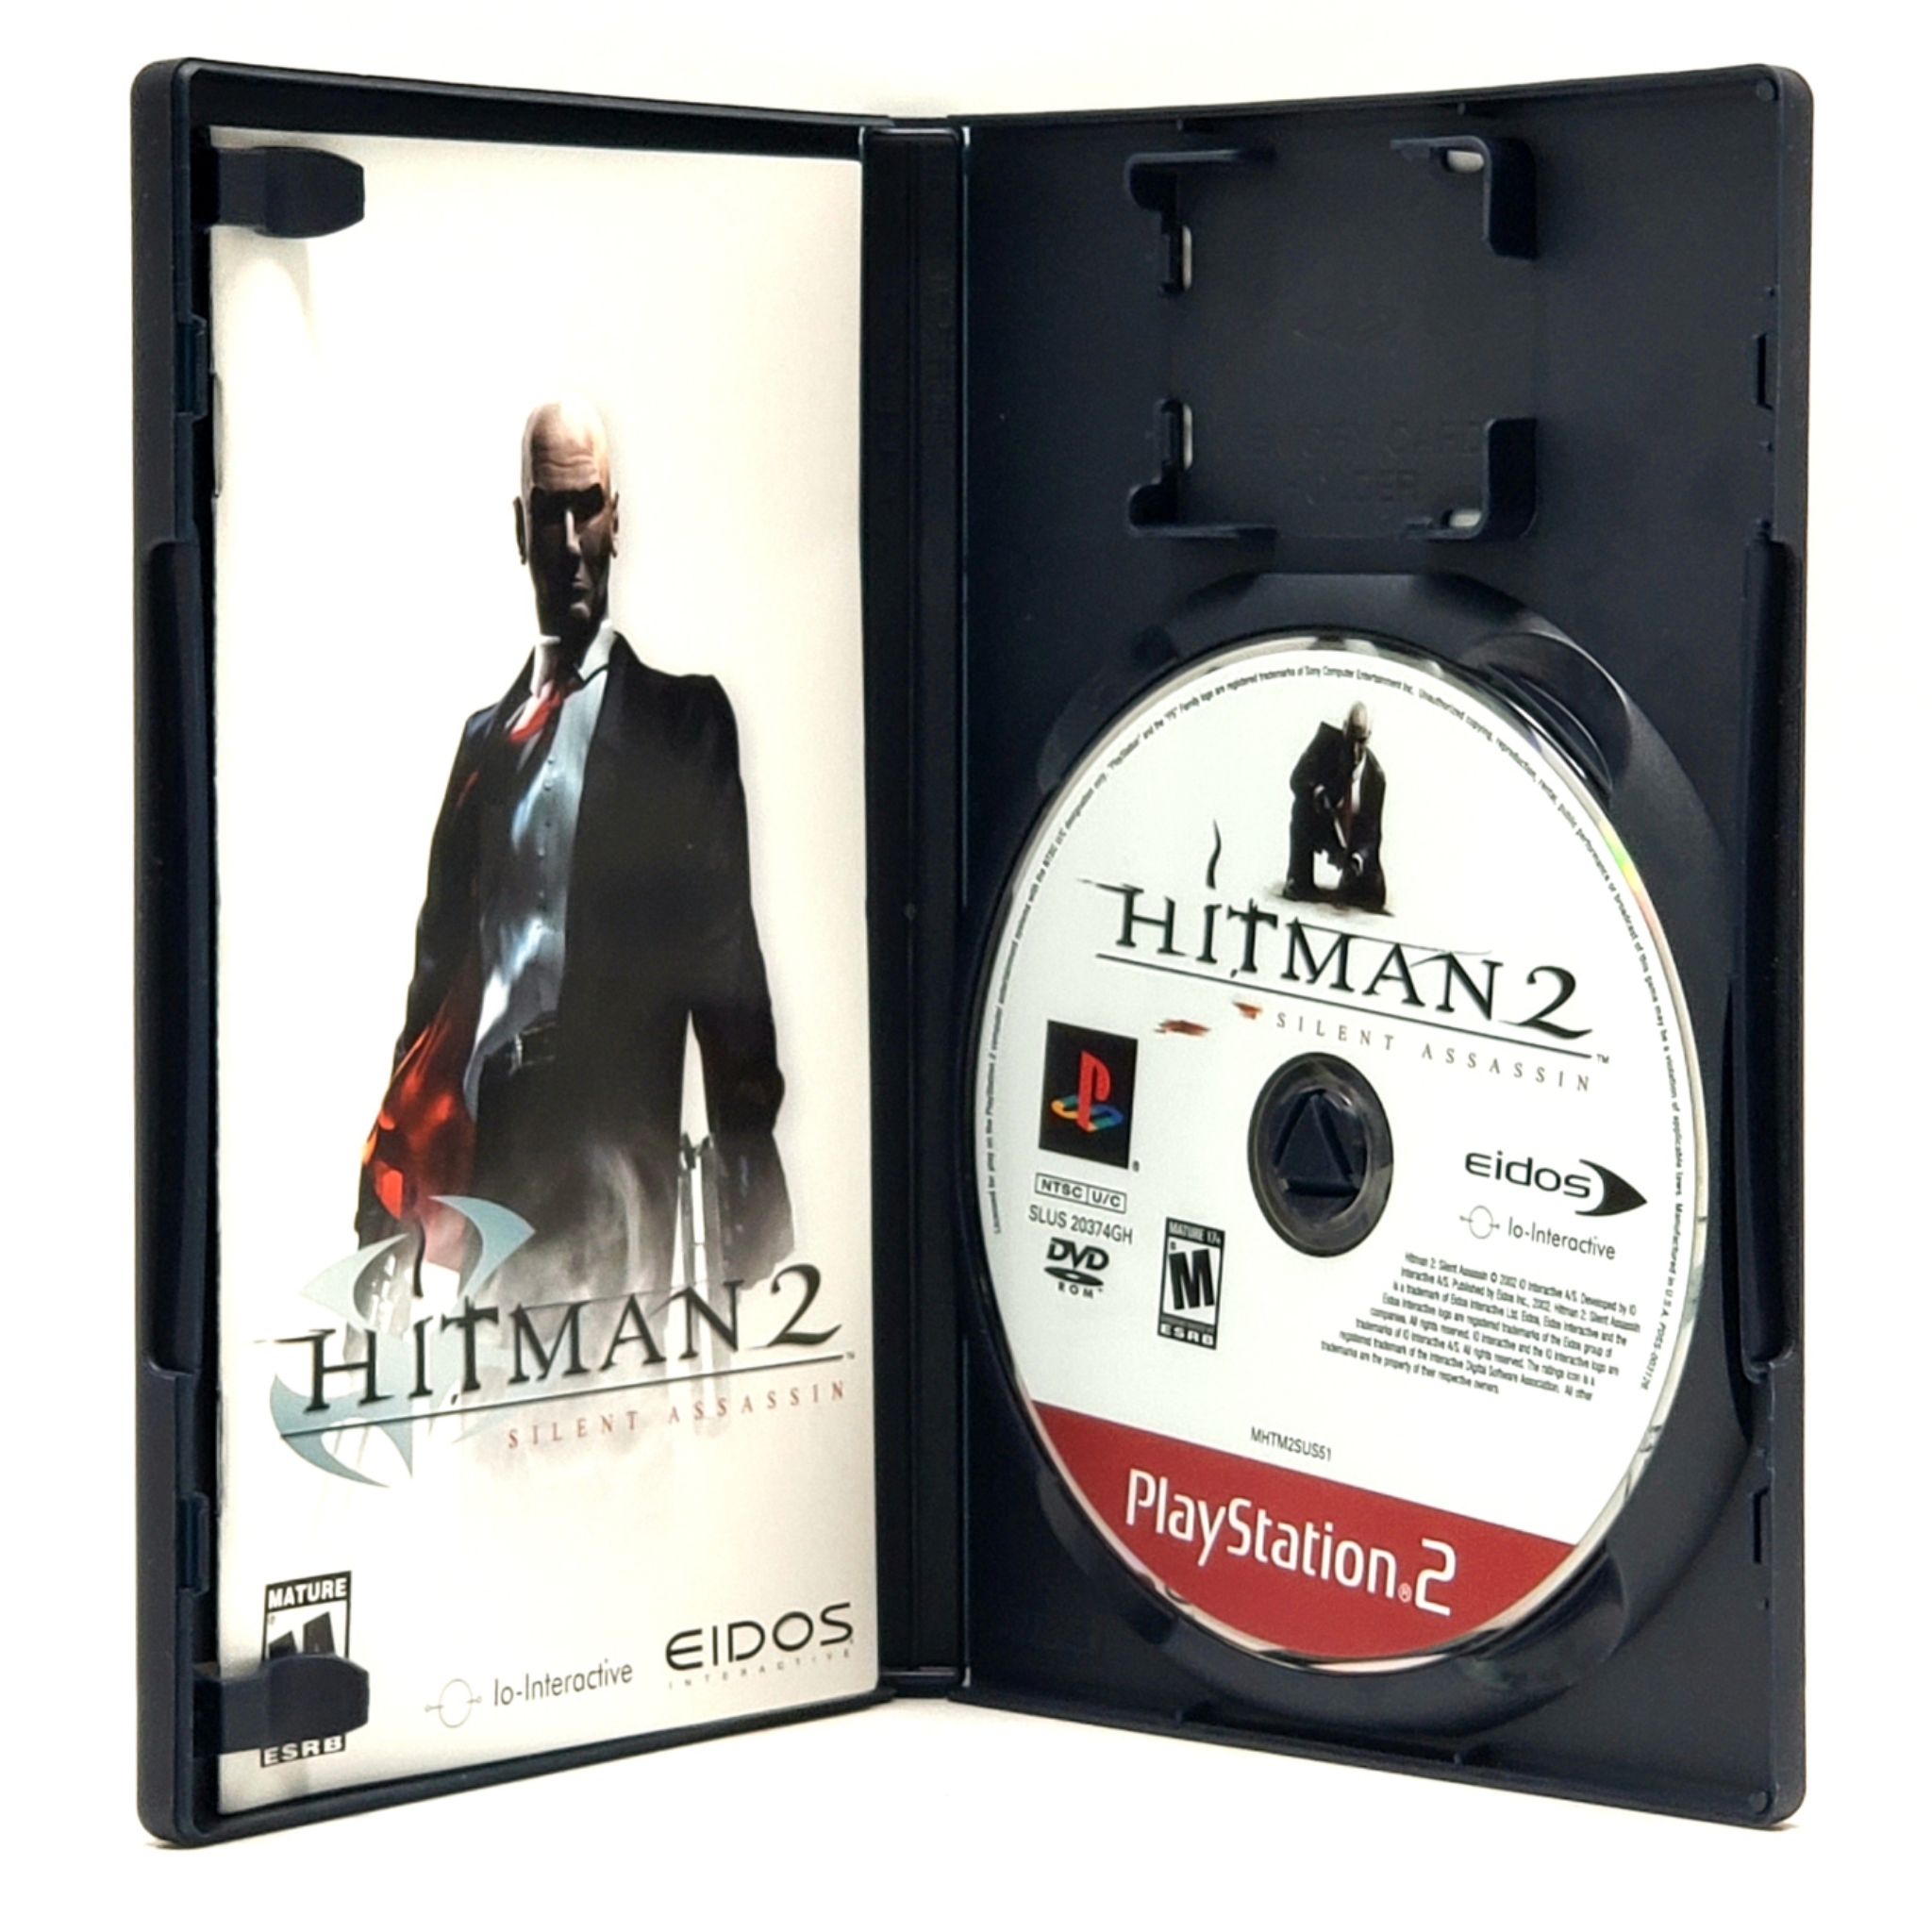 Hitman 2: Silent Assassin Greatest Hits Video Game for PS2 - CIB - Used